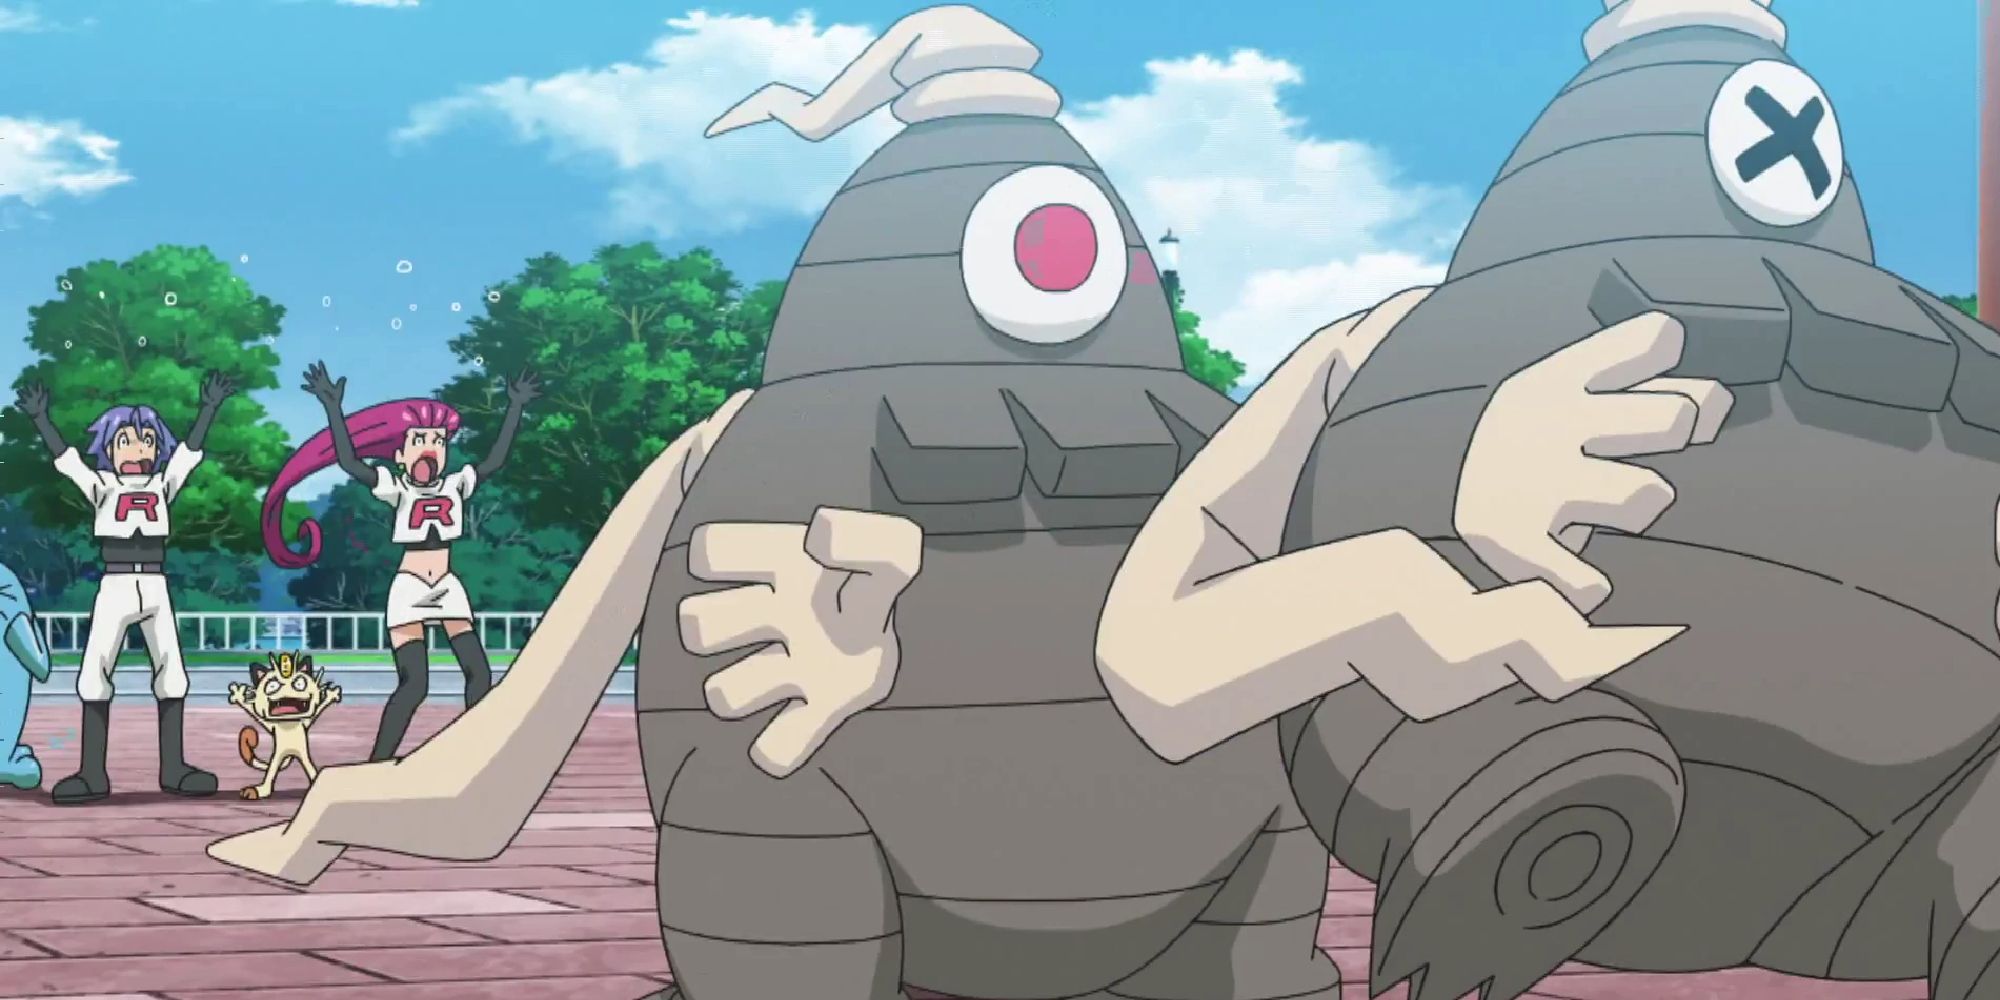 Team Rocket's Dusclops attacking another Dusclops in the Pokemon anime